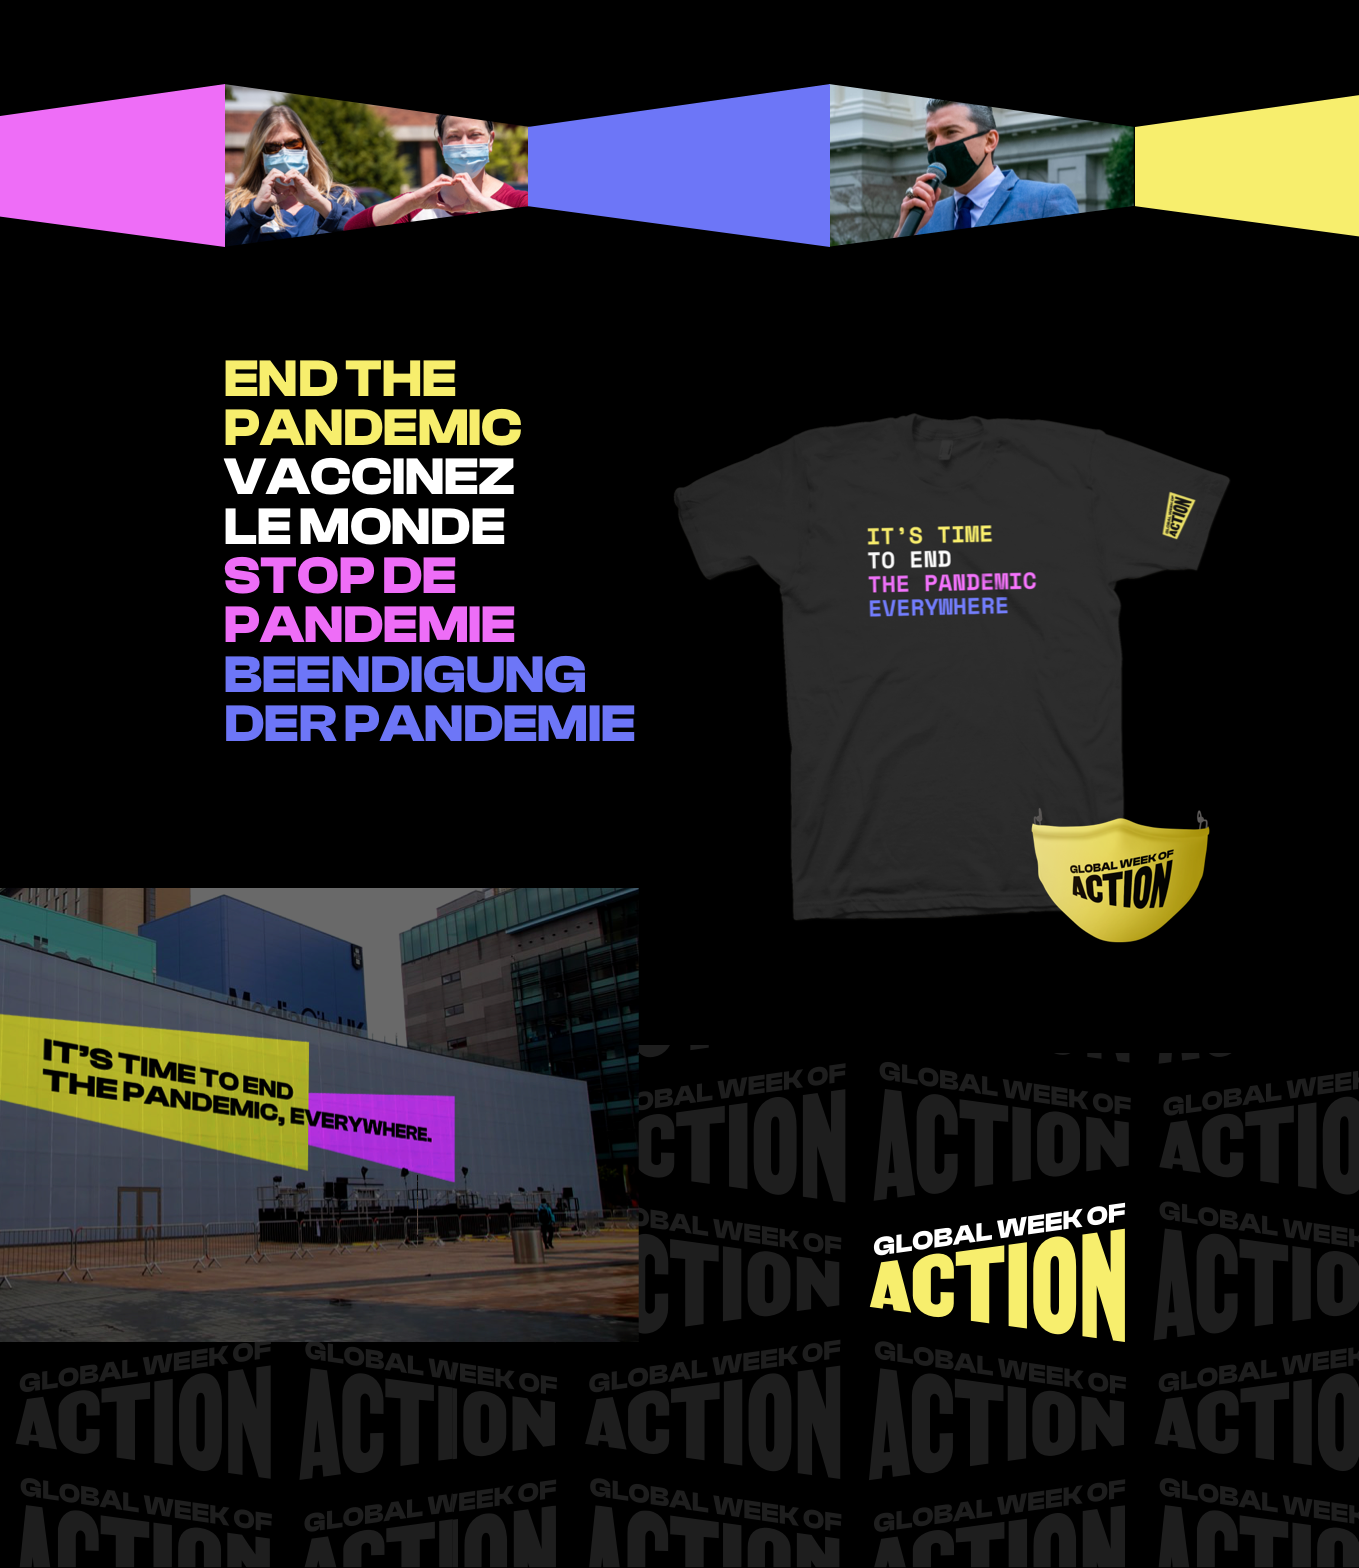 Global Week of Action brand collage showing a shirt, face mask, and various visual applications